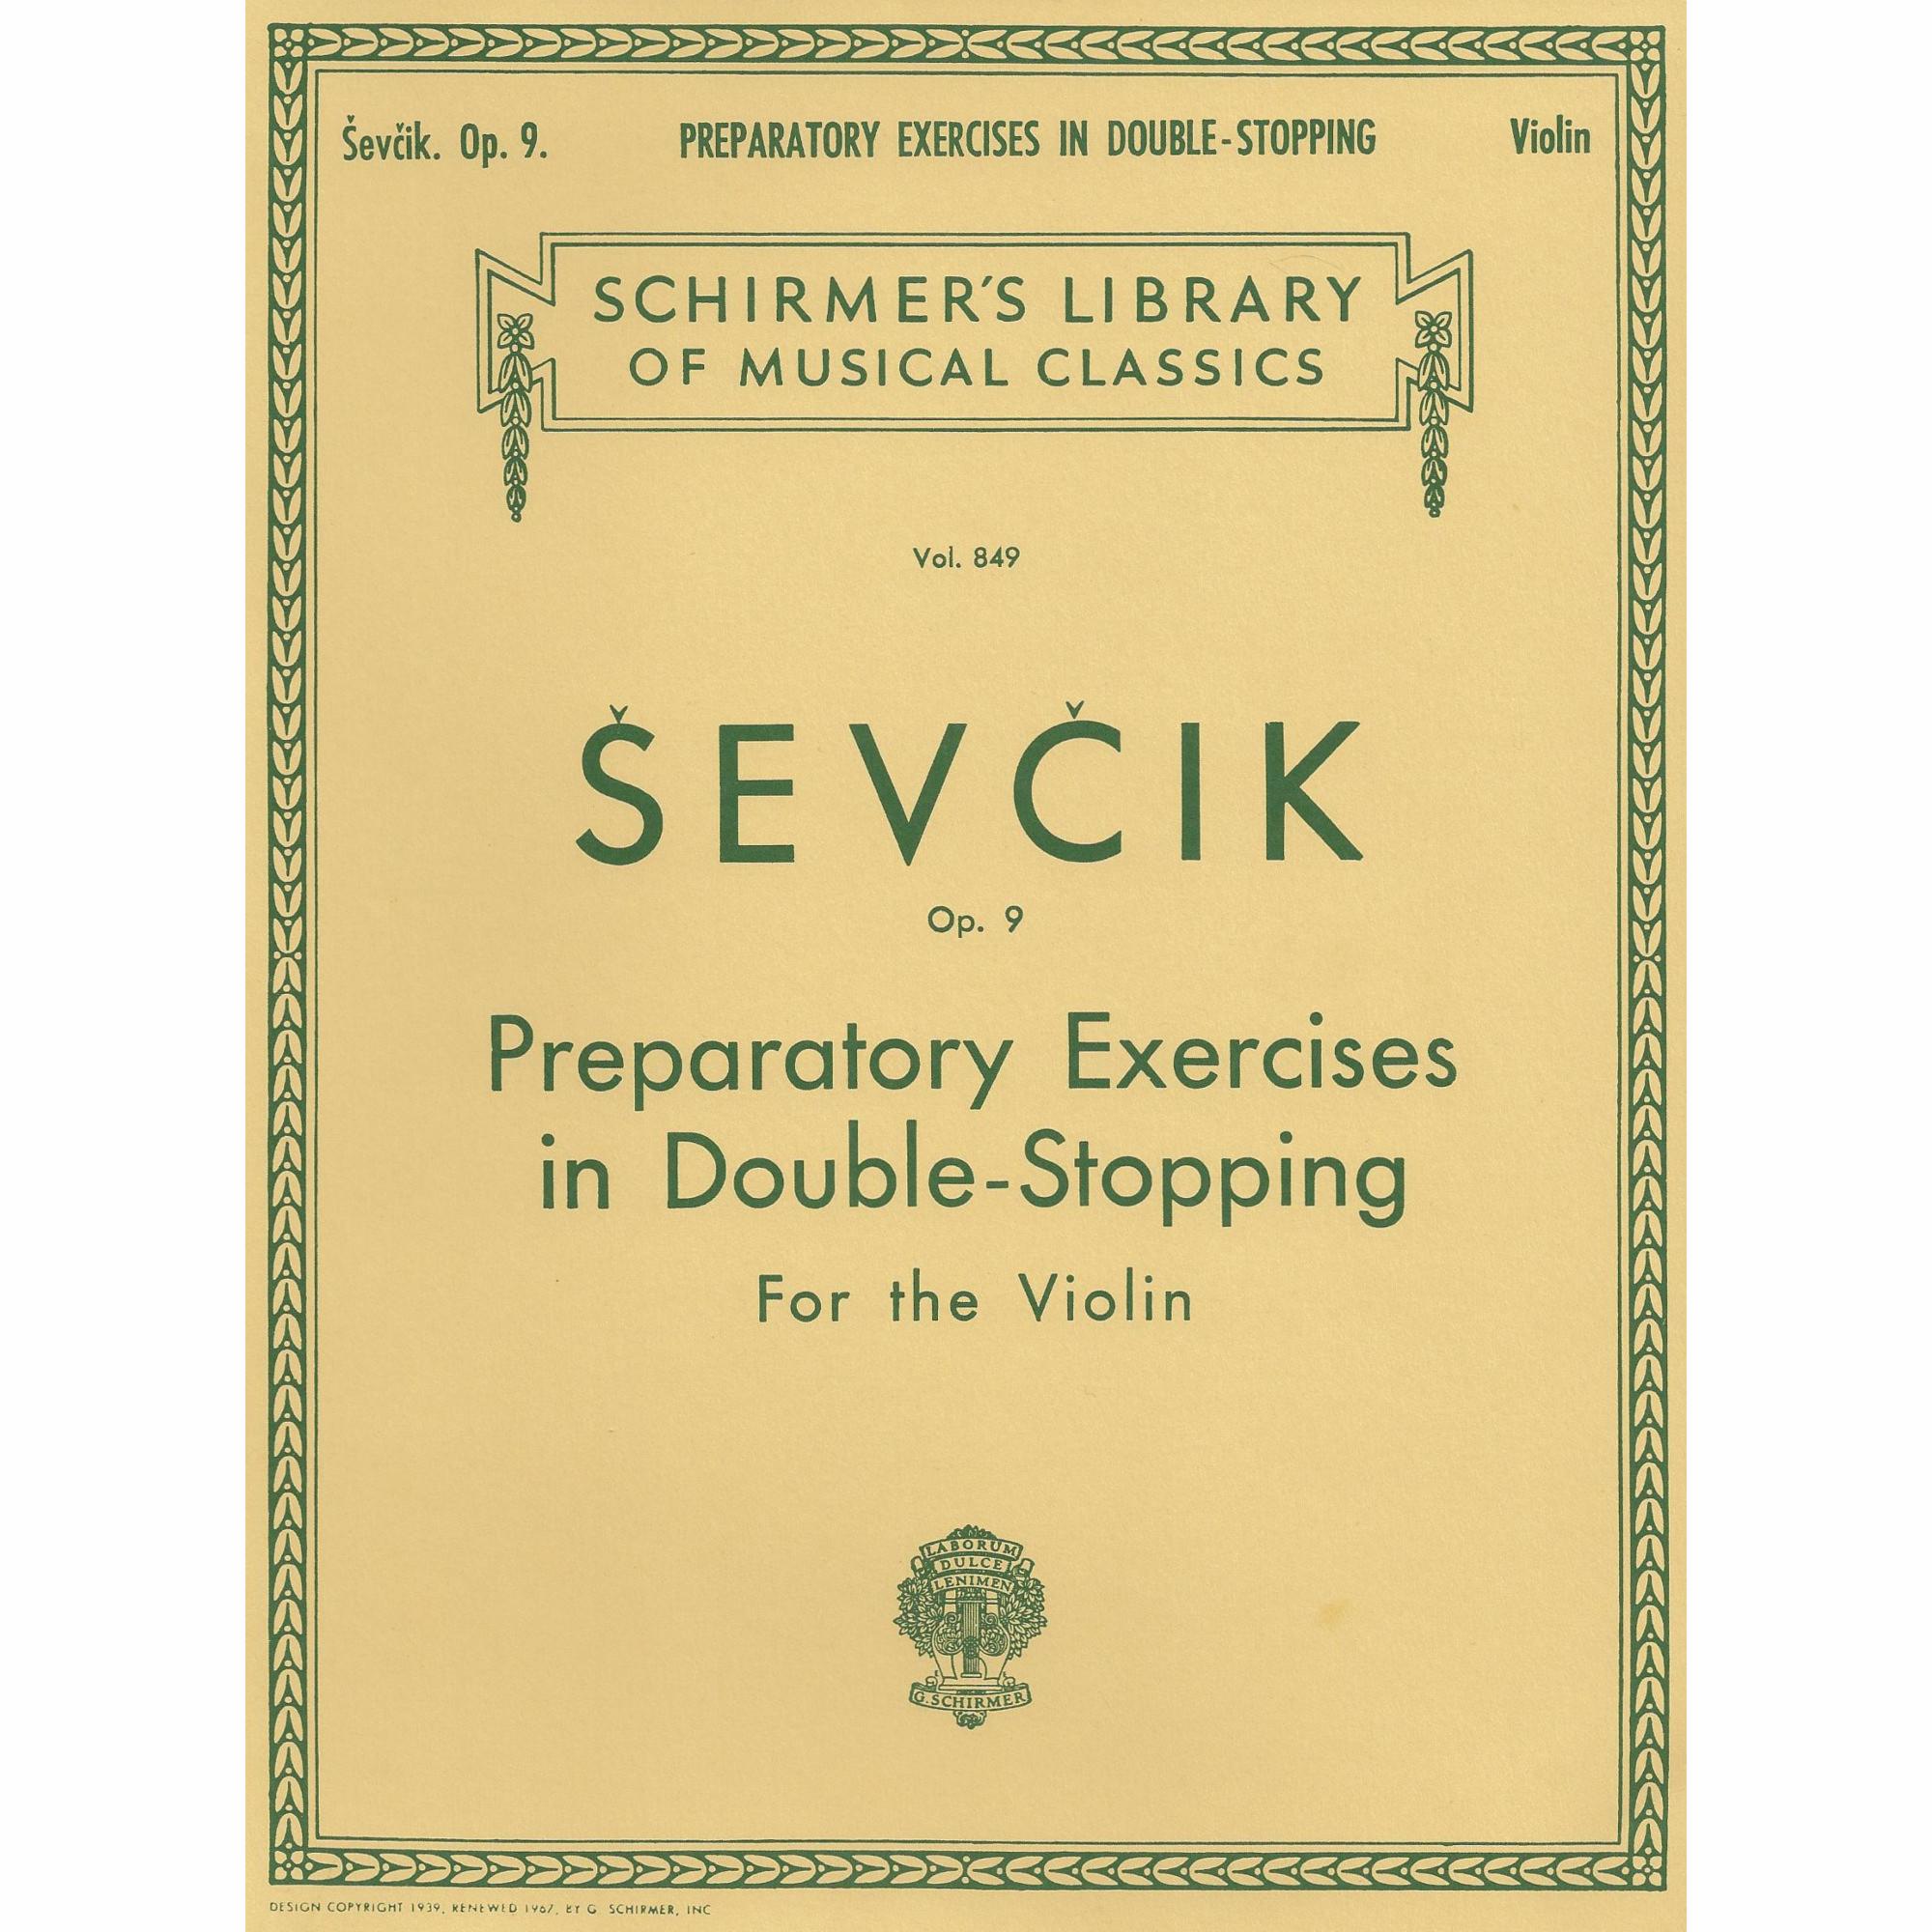 Sevcik -- Preparatory Exercises in Double-Stopping, Op. 9 for Violin